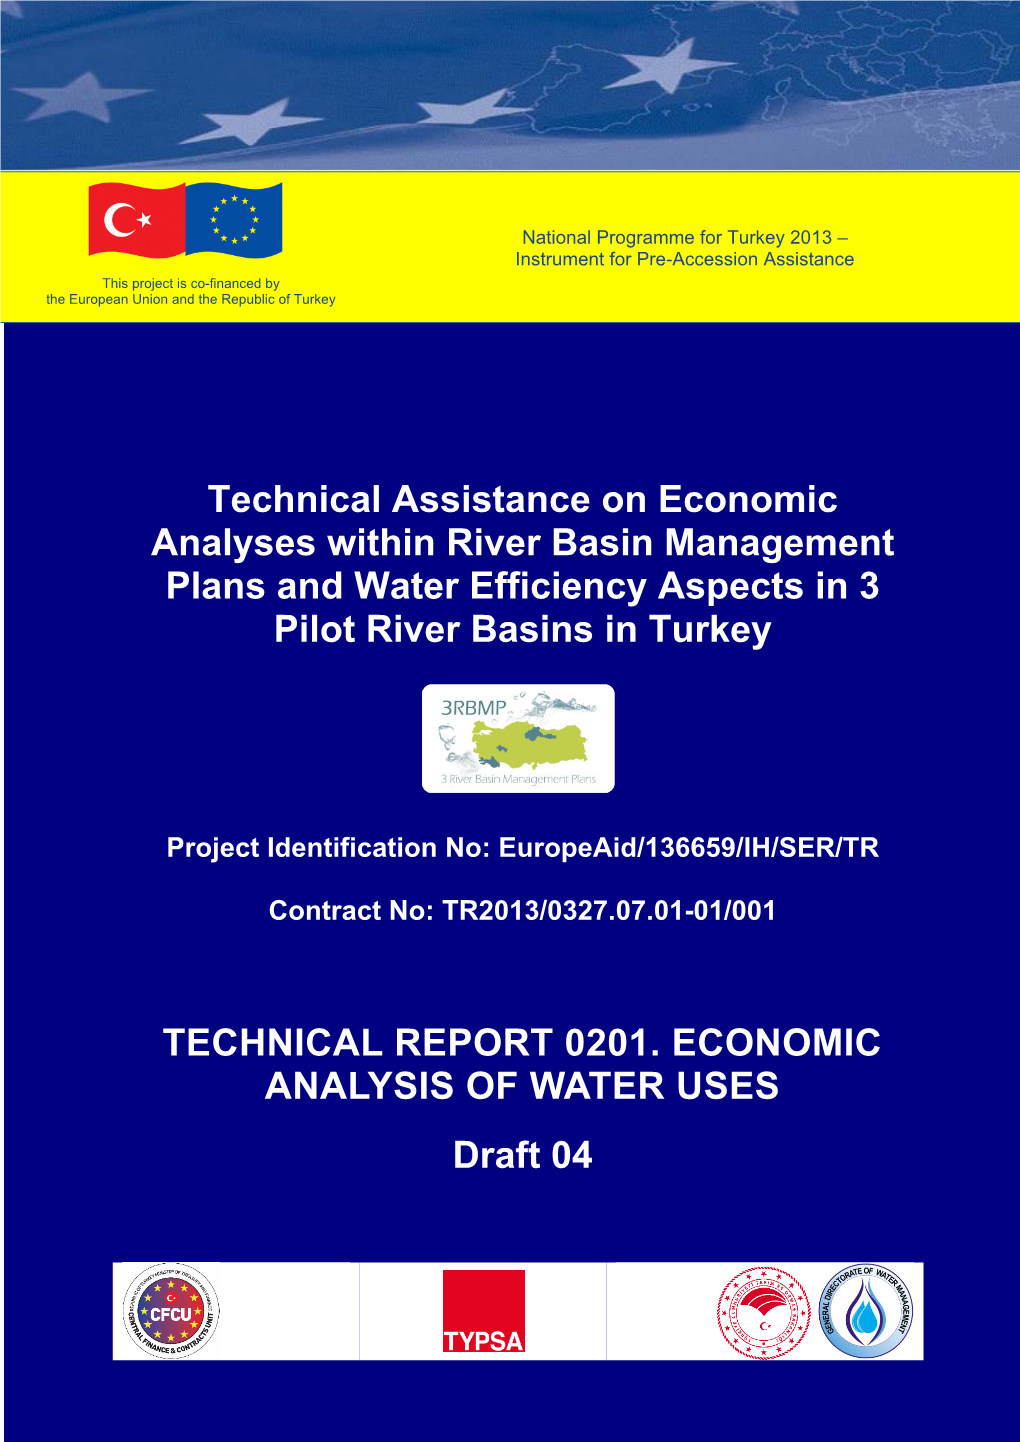 Technical Assistance on Economic Analyses Within River Basin Management Plans and Water Efficiency Aspects in 3 Pilot River Basins in Turkey